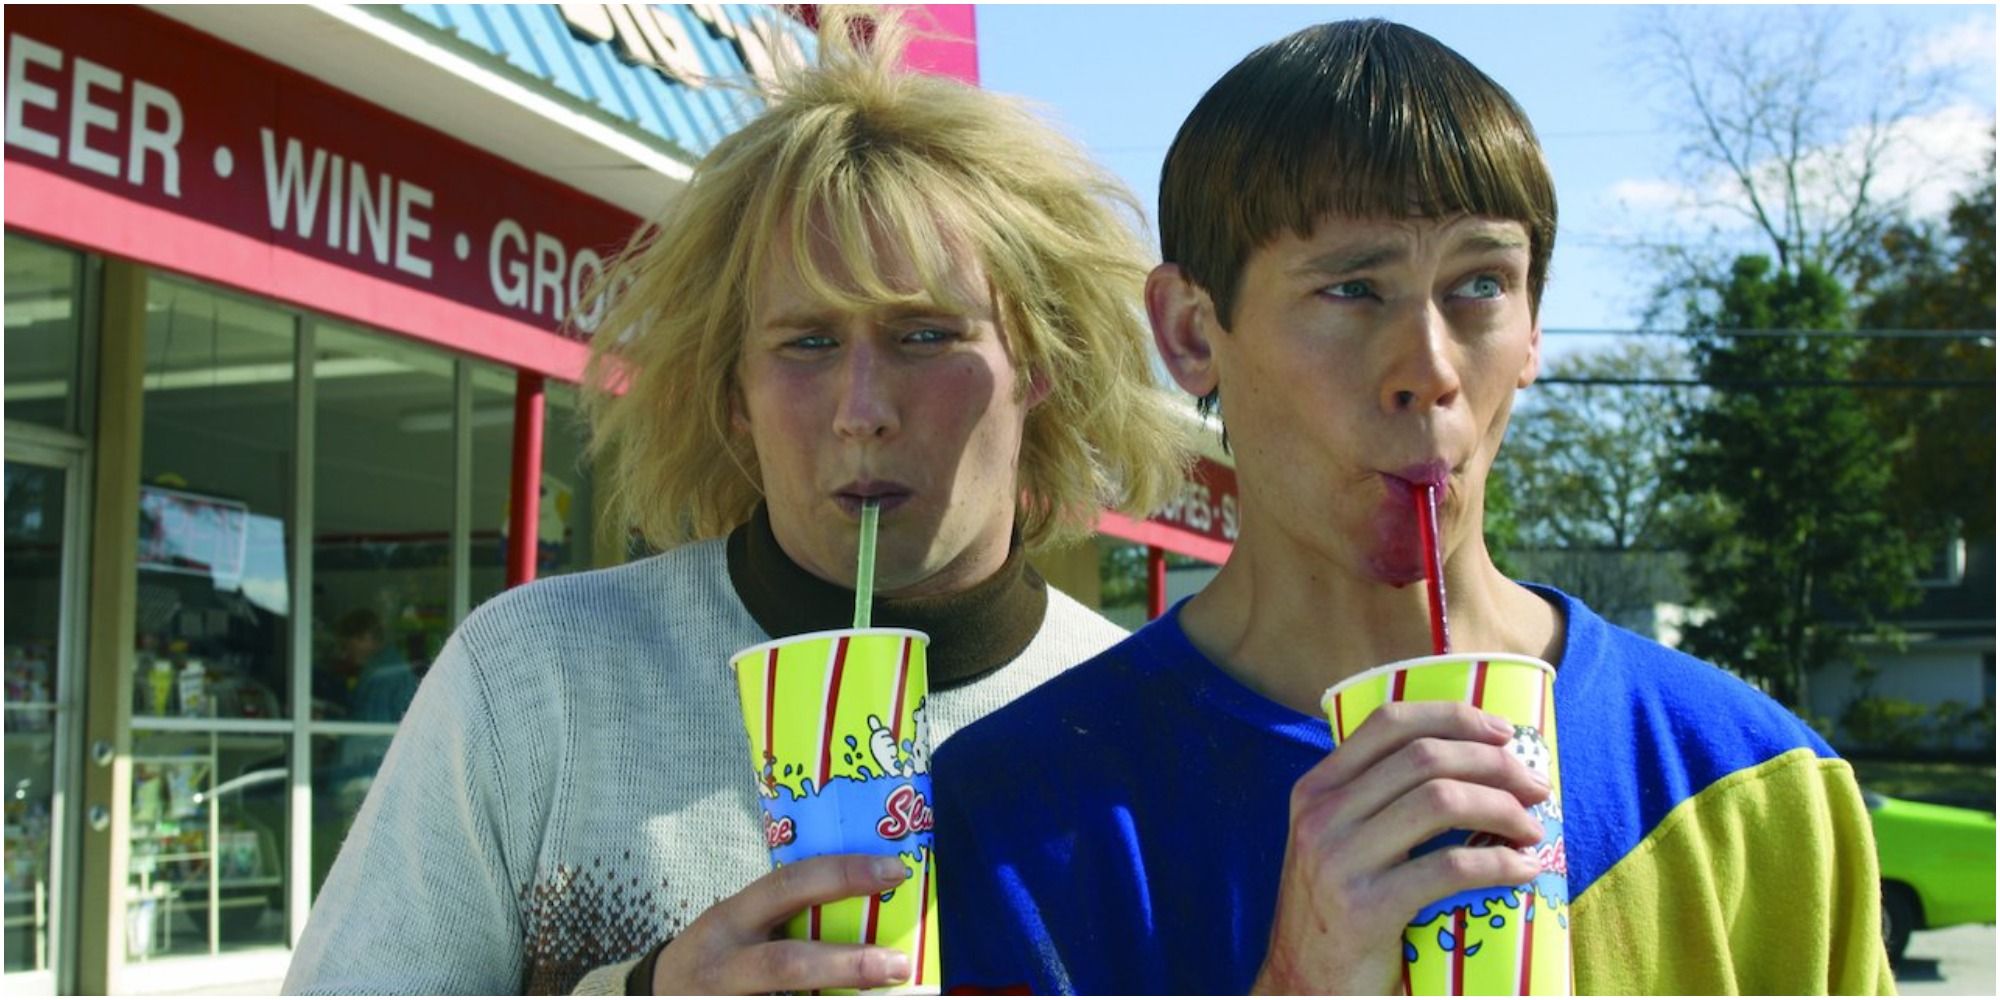 A screenshot of young teenage Harry Dunne and Lloyd Christmas from Dumb & Dumberer: When Harry Met Lloyd